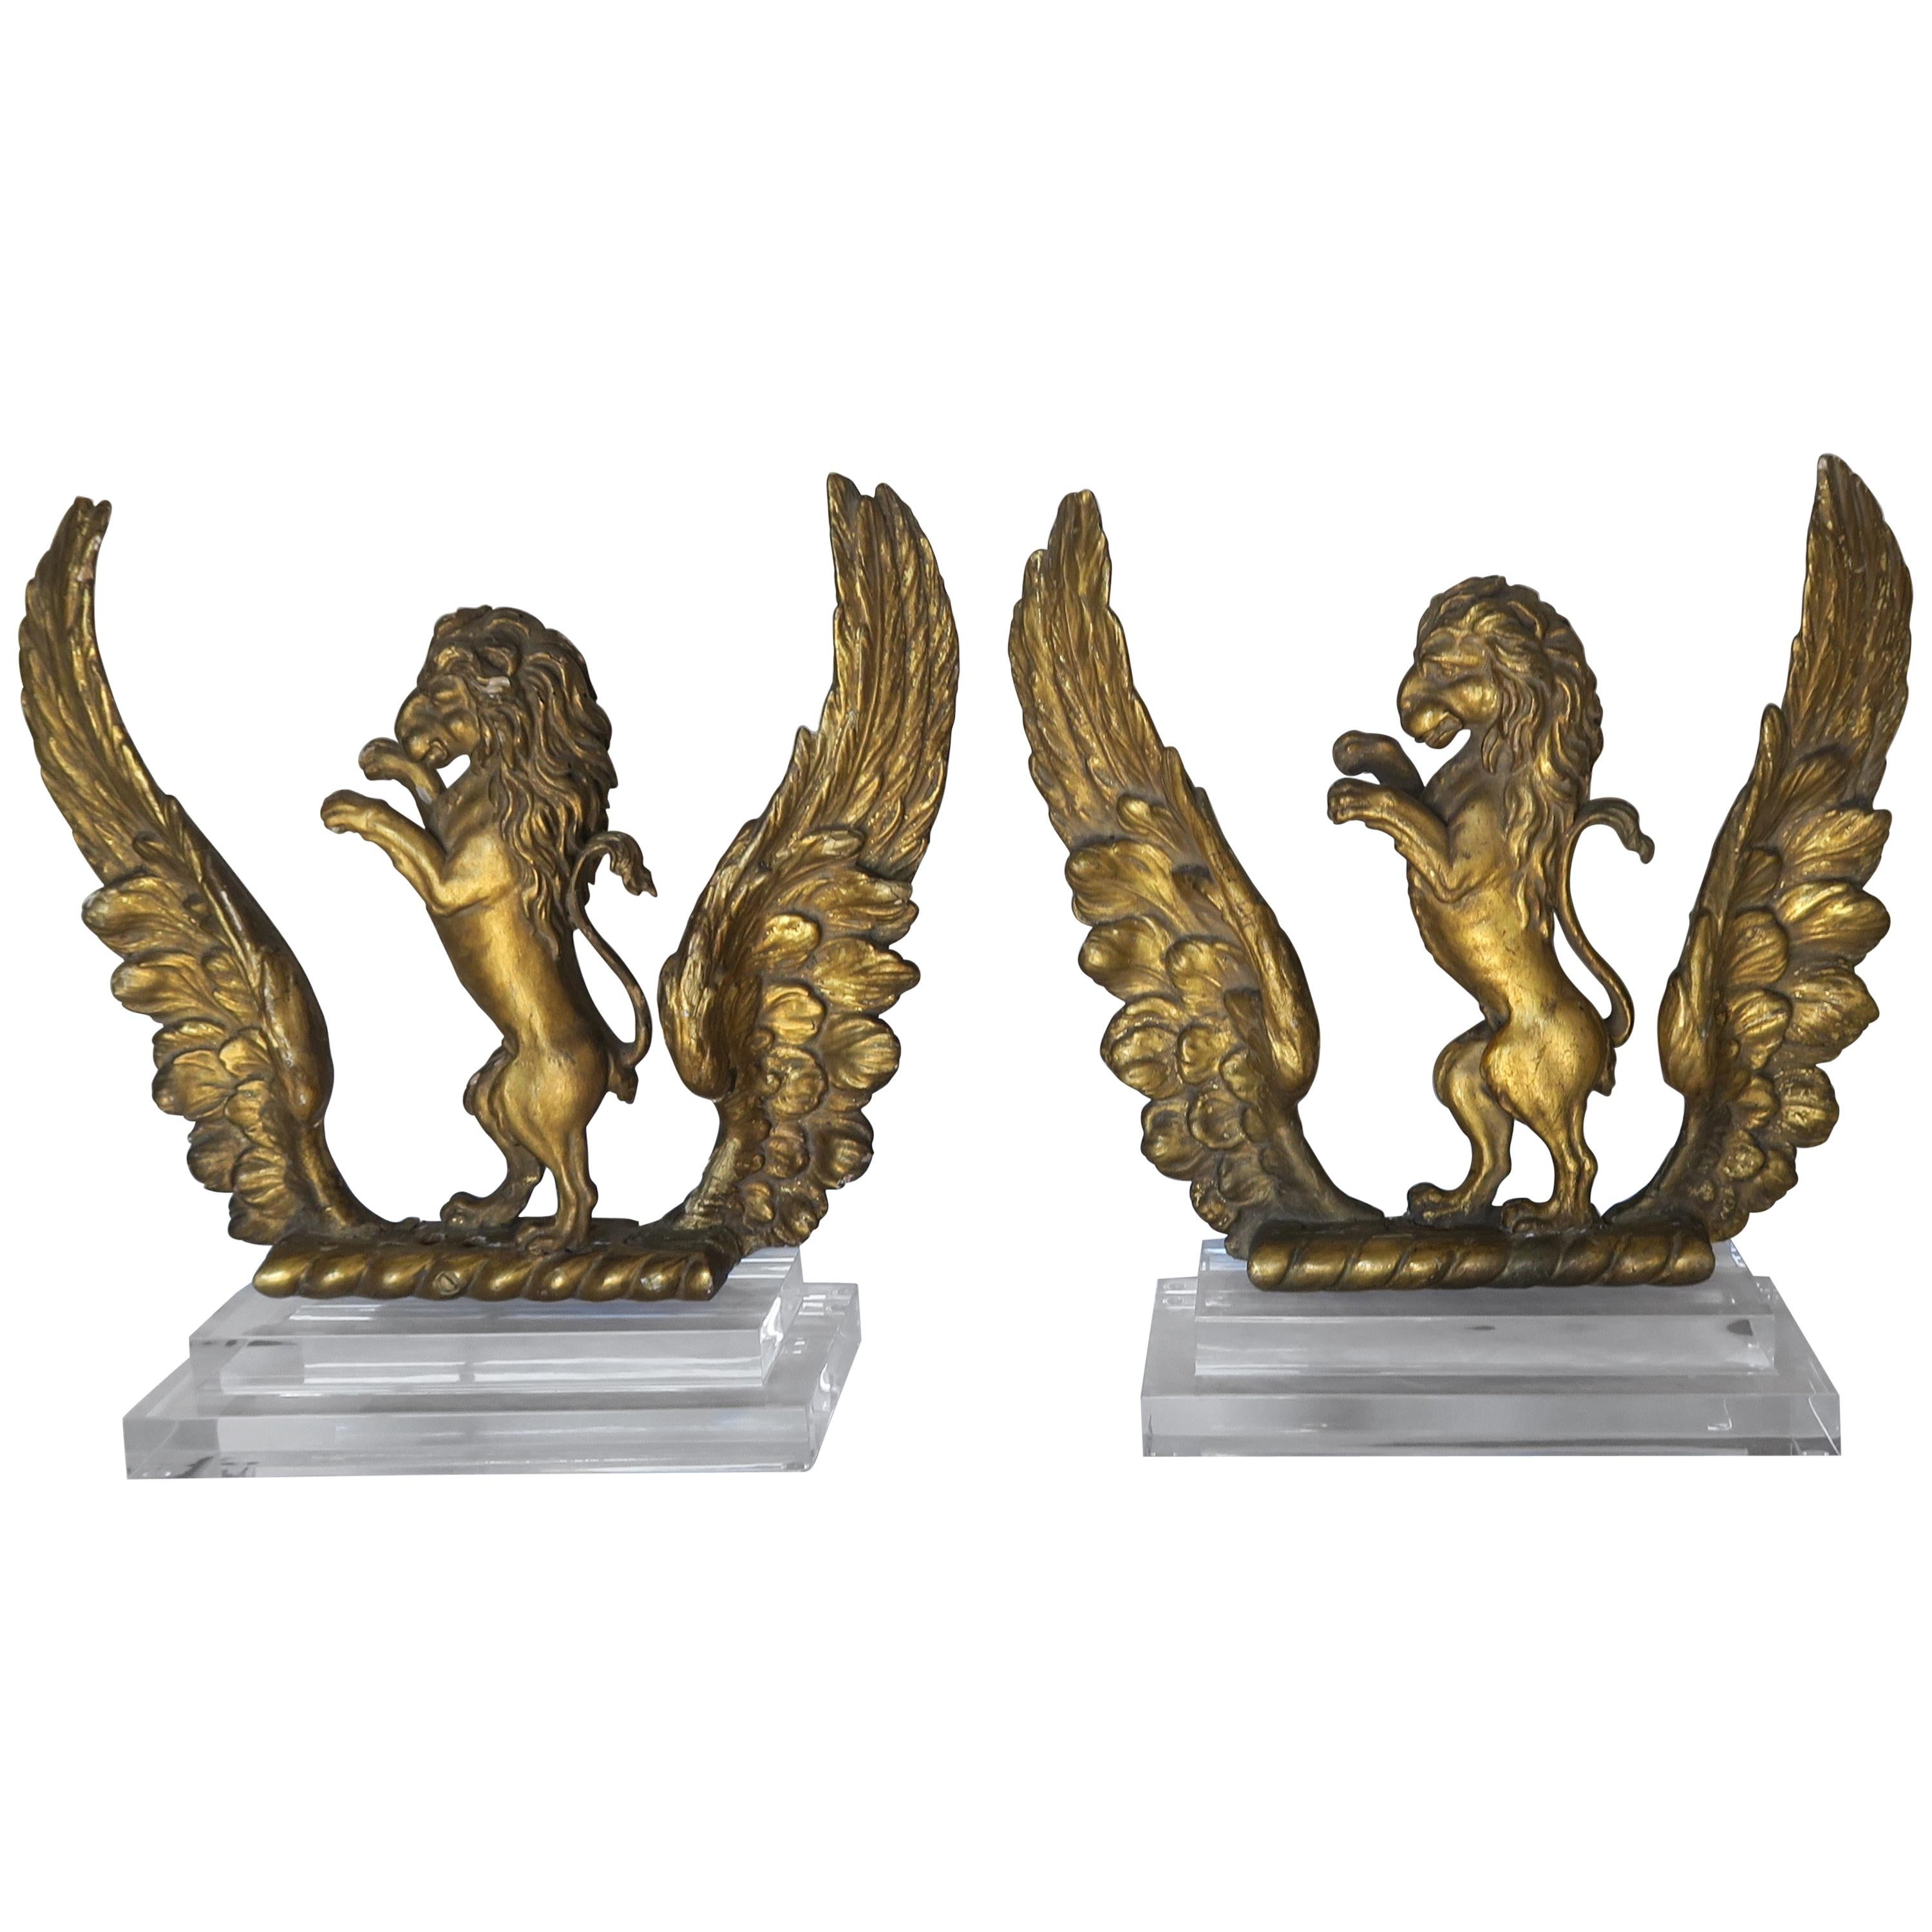 Pair of 19th Century Italian Giltwood Lions on Lucite Bases